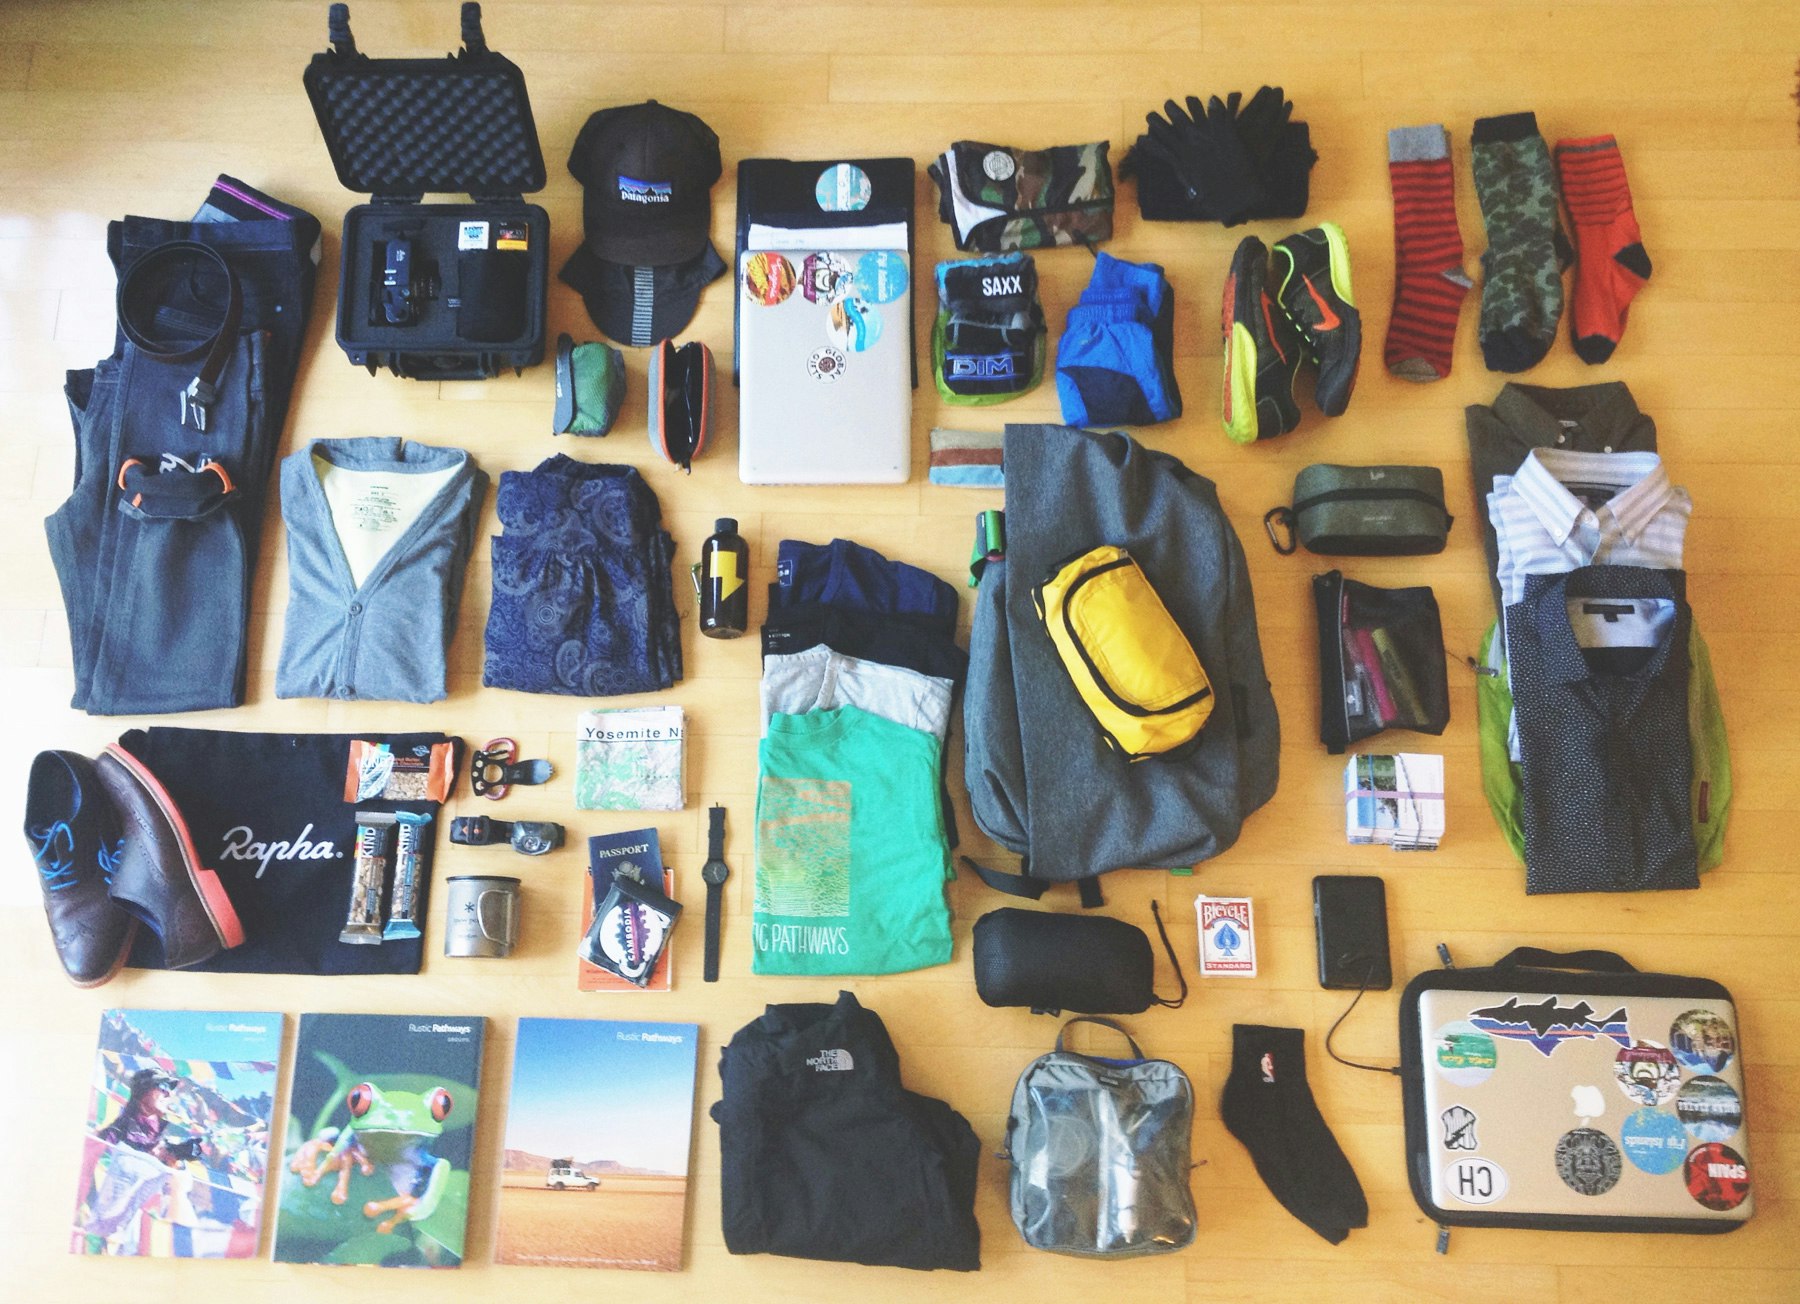 A Travel Checklist: What to Pack for a Student Trip